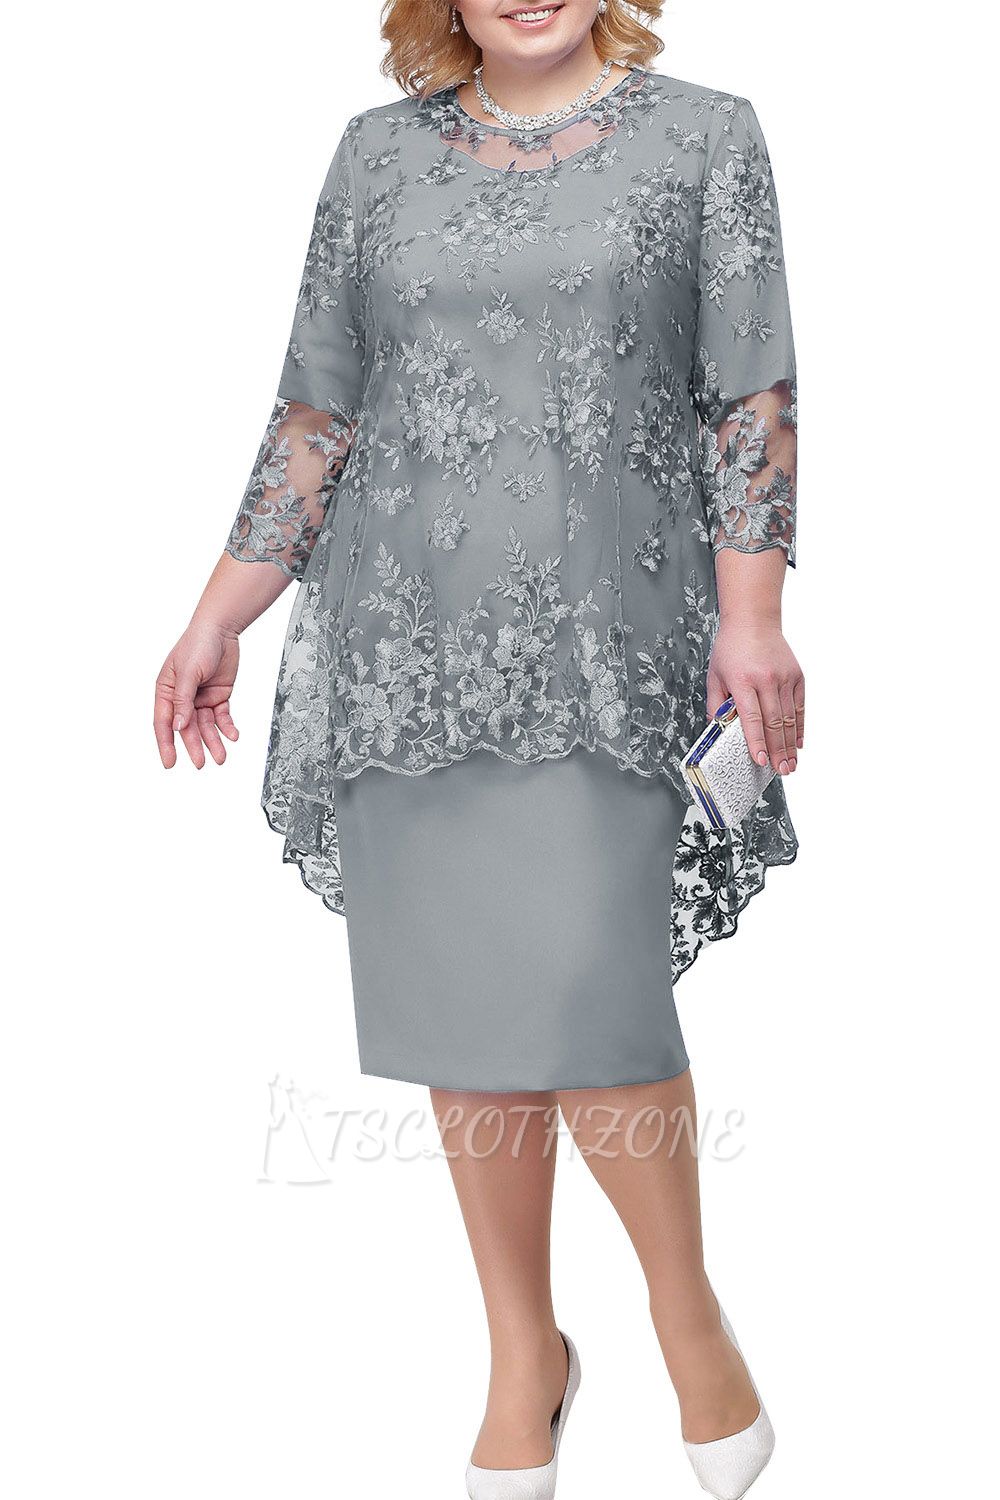 Tulle Lace 3/4 Sleeves Knee Length Mother of Bride Dress | Mother Wedding Party Dress